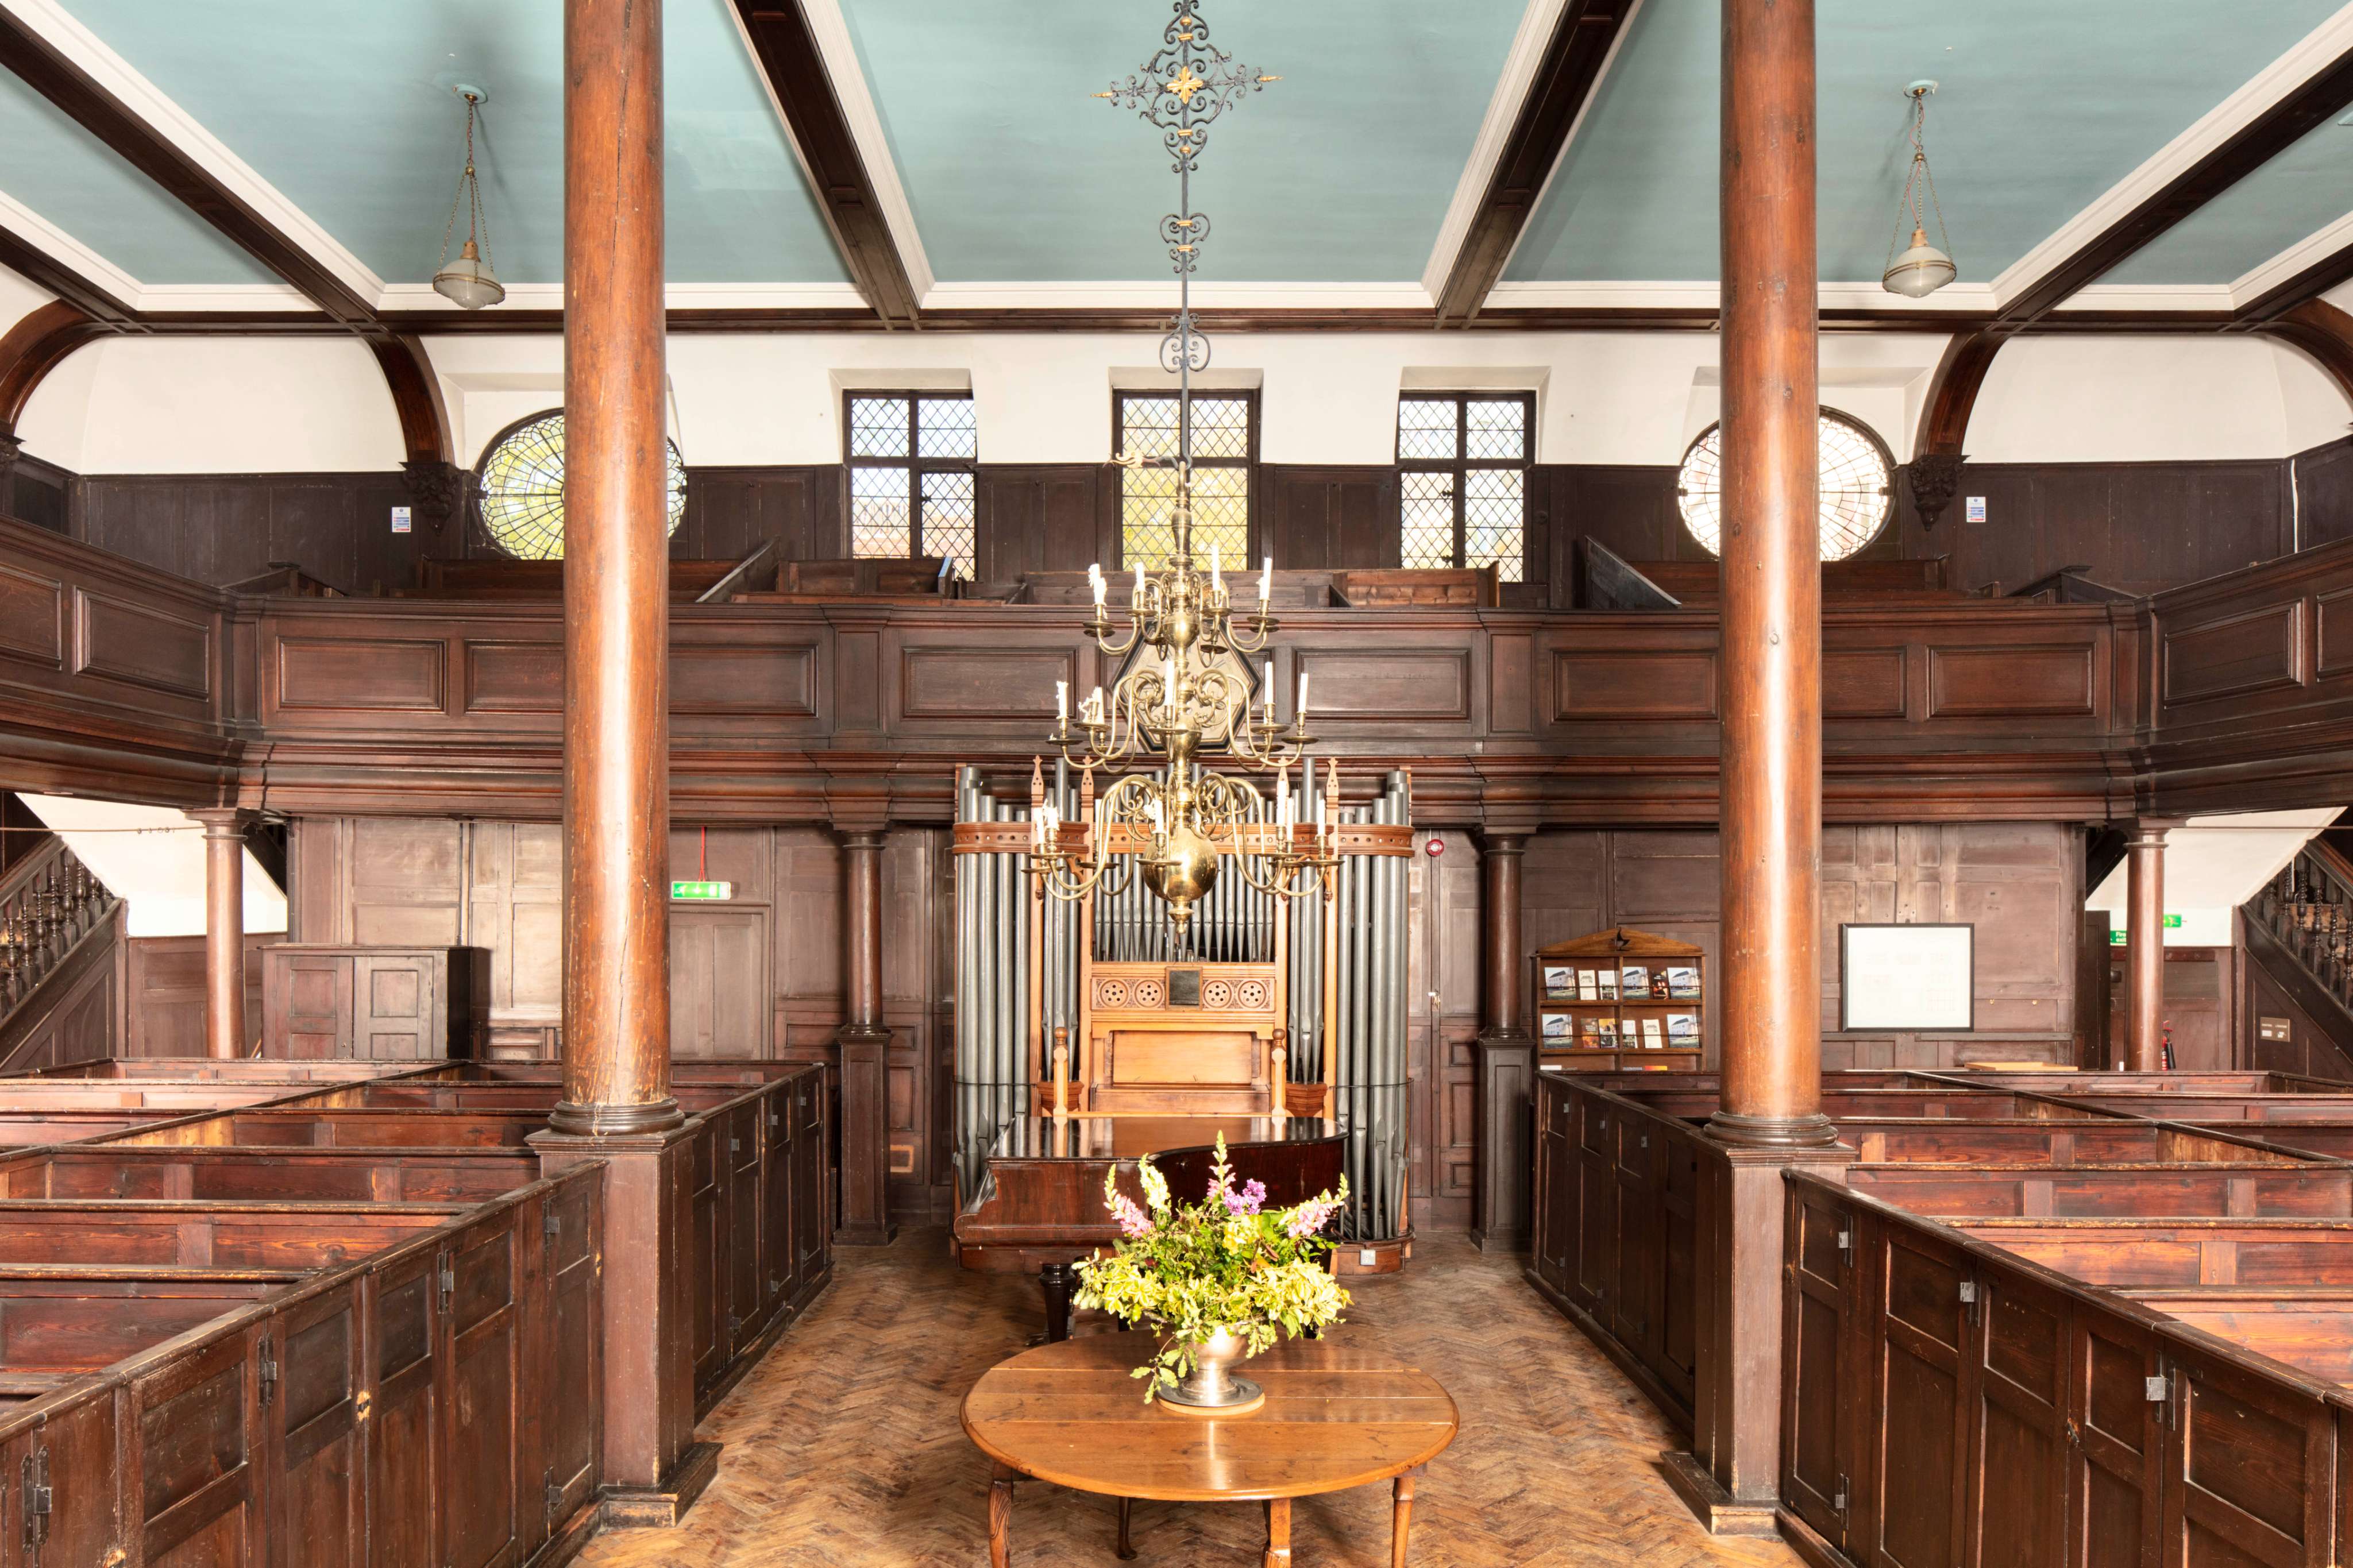 The beautiful interior of the Unitarian Meeting House showing dark wood pews, parquet flooring, wooden pillars and the late 19th century organ. A chandelier hangs from the middle of the ceiling.